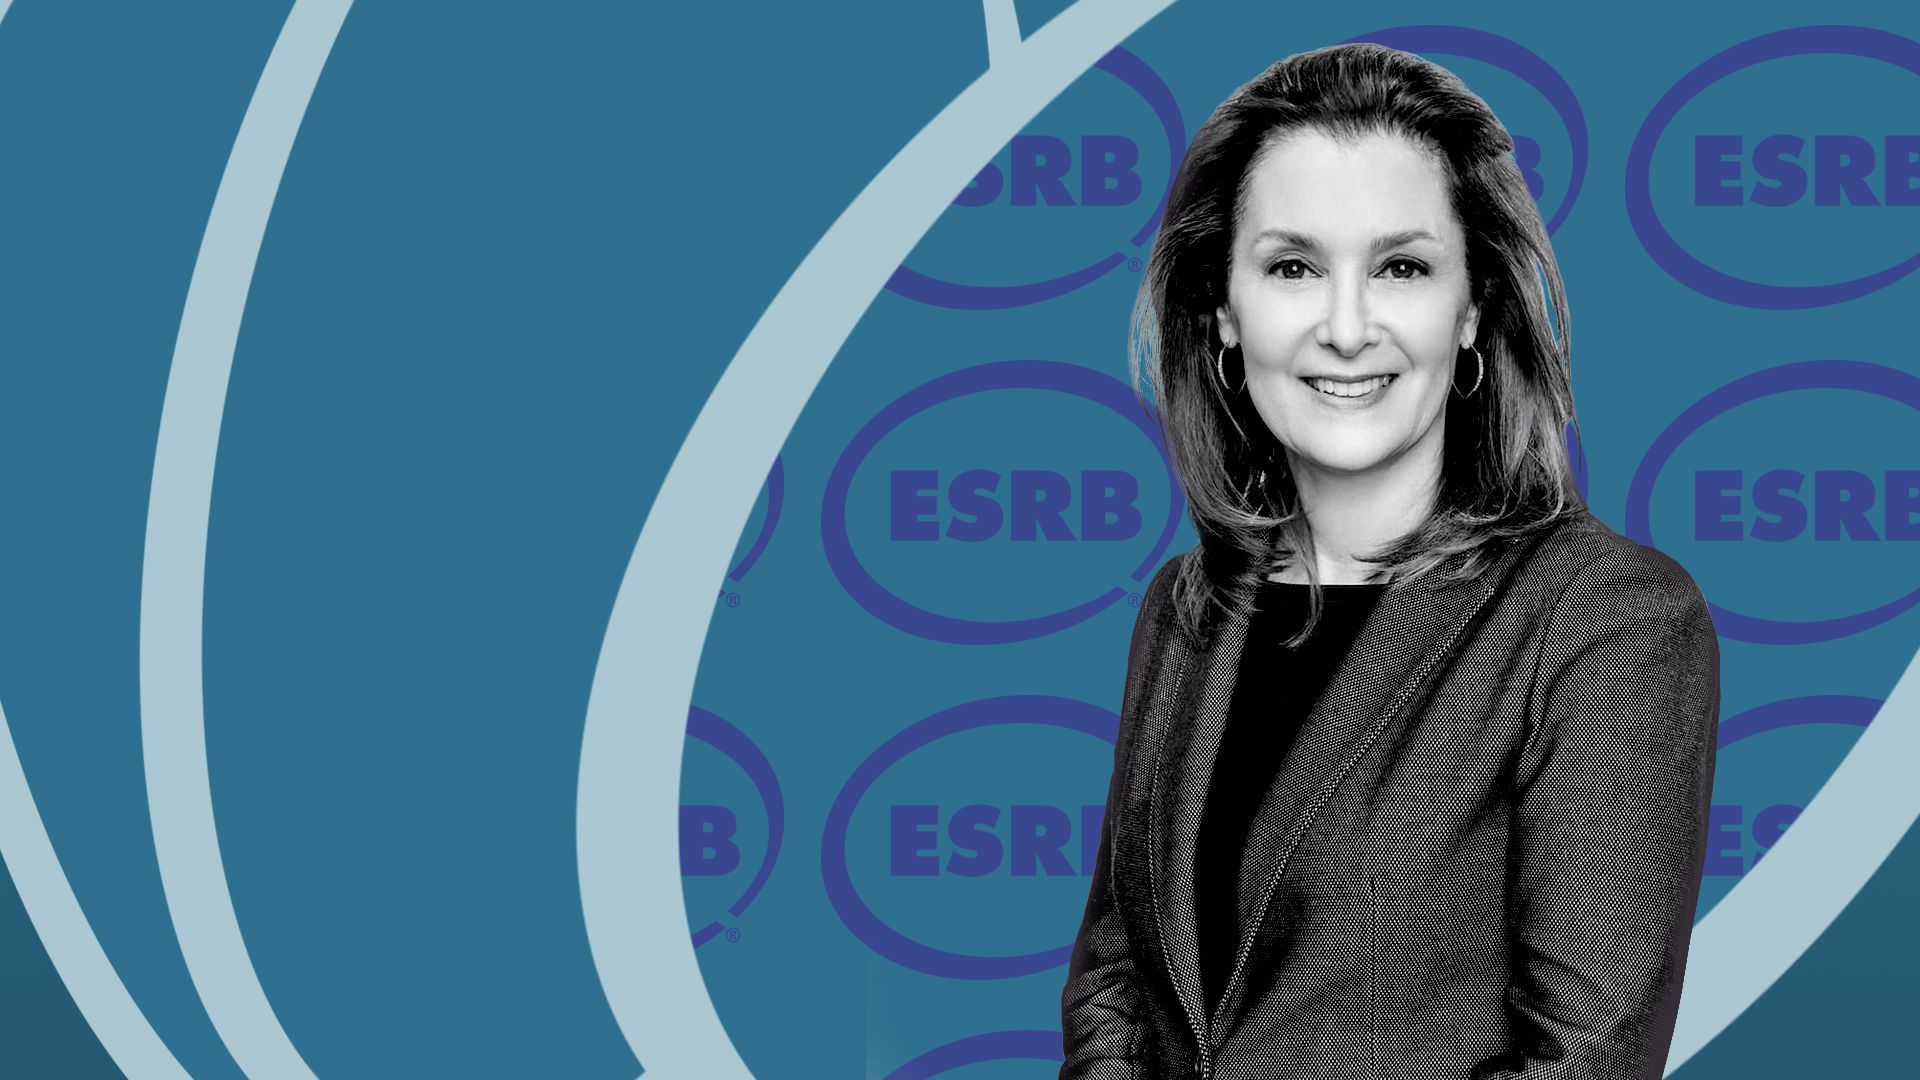 Photo illustration of Patricia Vance in front of the ESRB logo and shapes resembling the logo